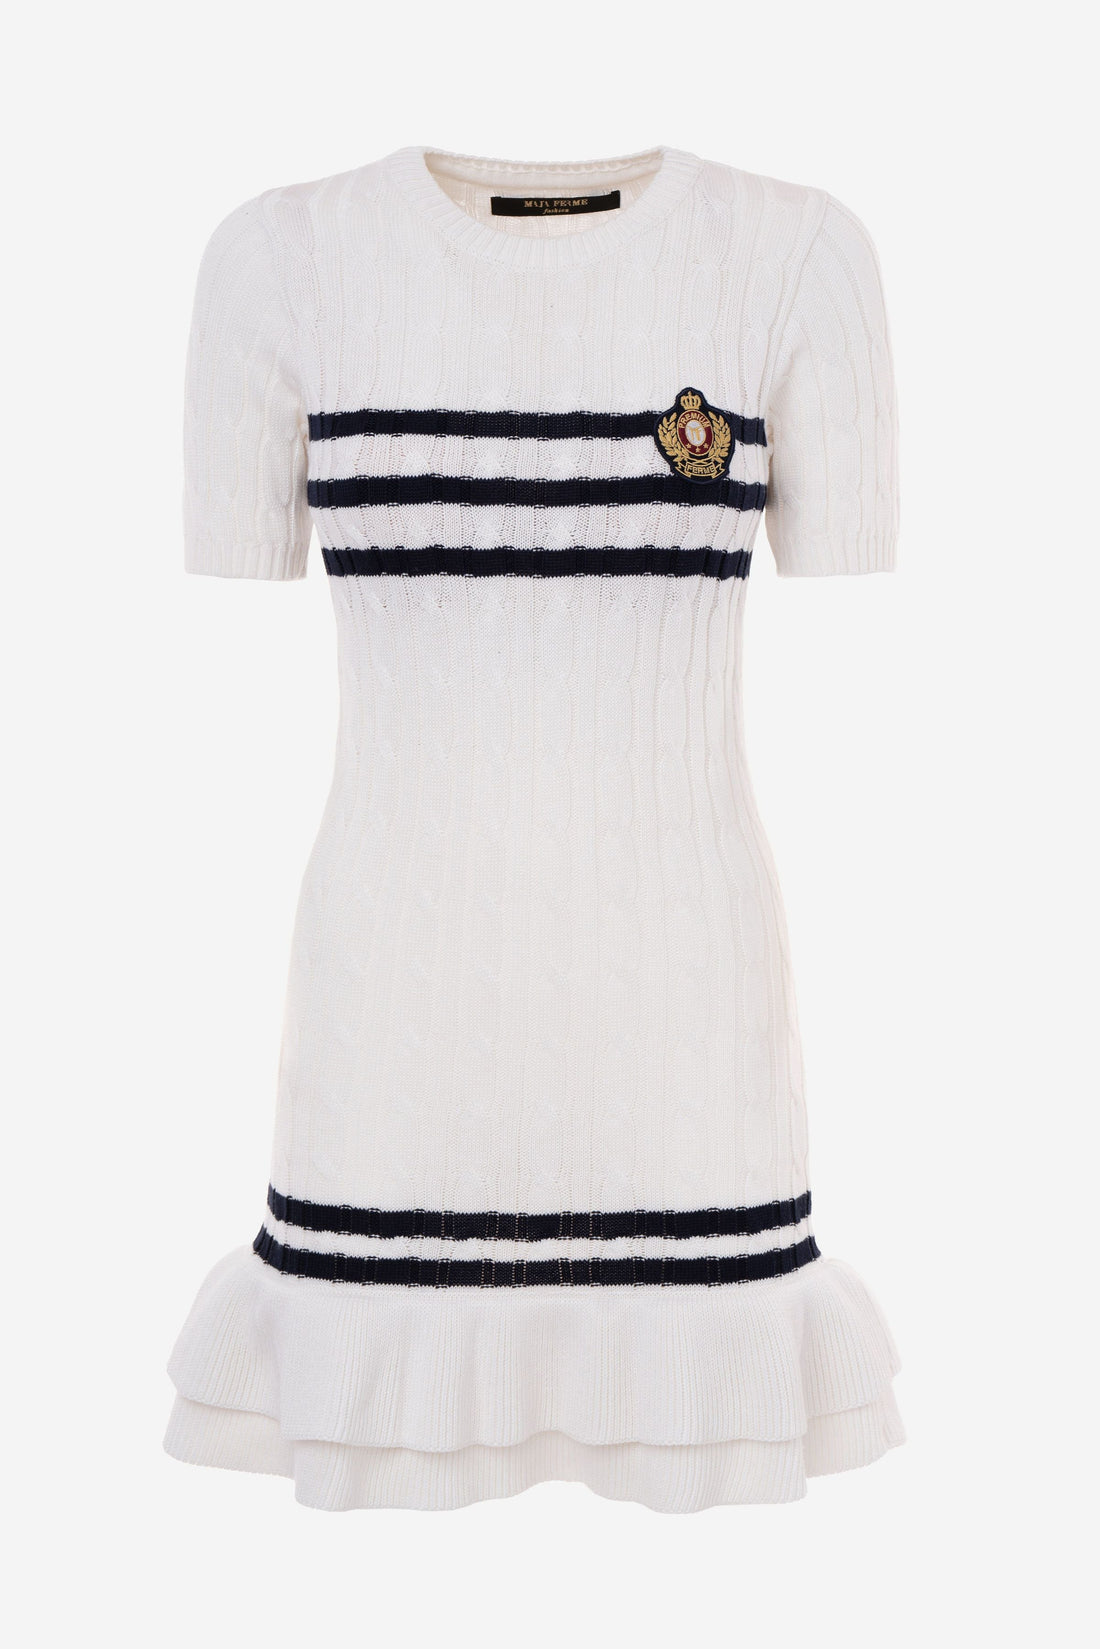 Cable-Knit Short-Sleeve Fit and Flare Ruffle Dress WHITE-BLUE STRIPES